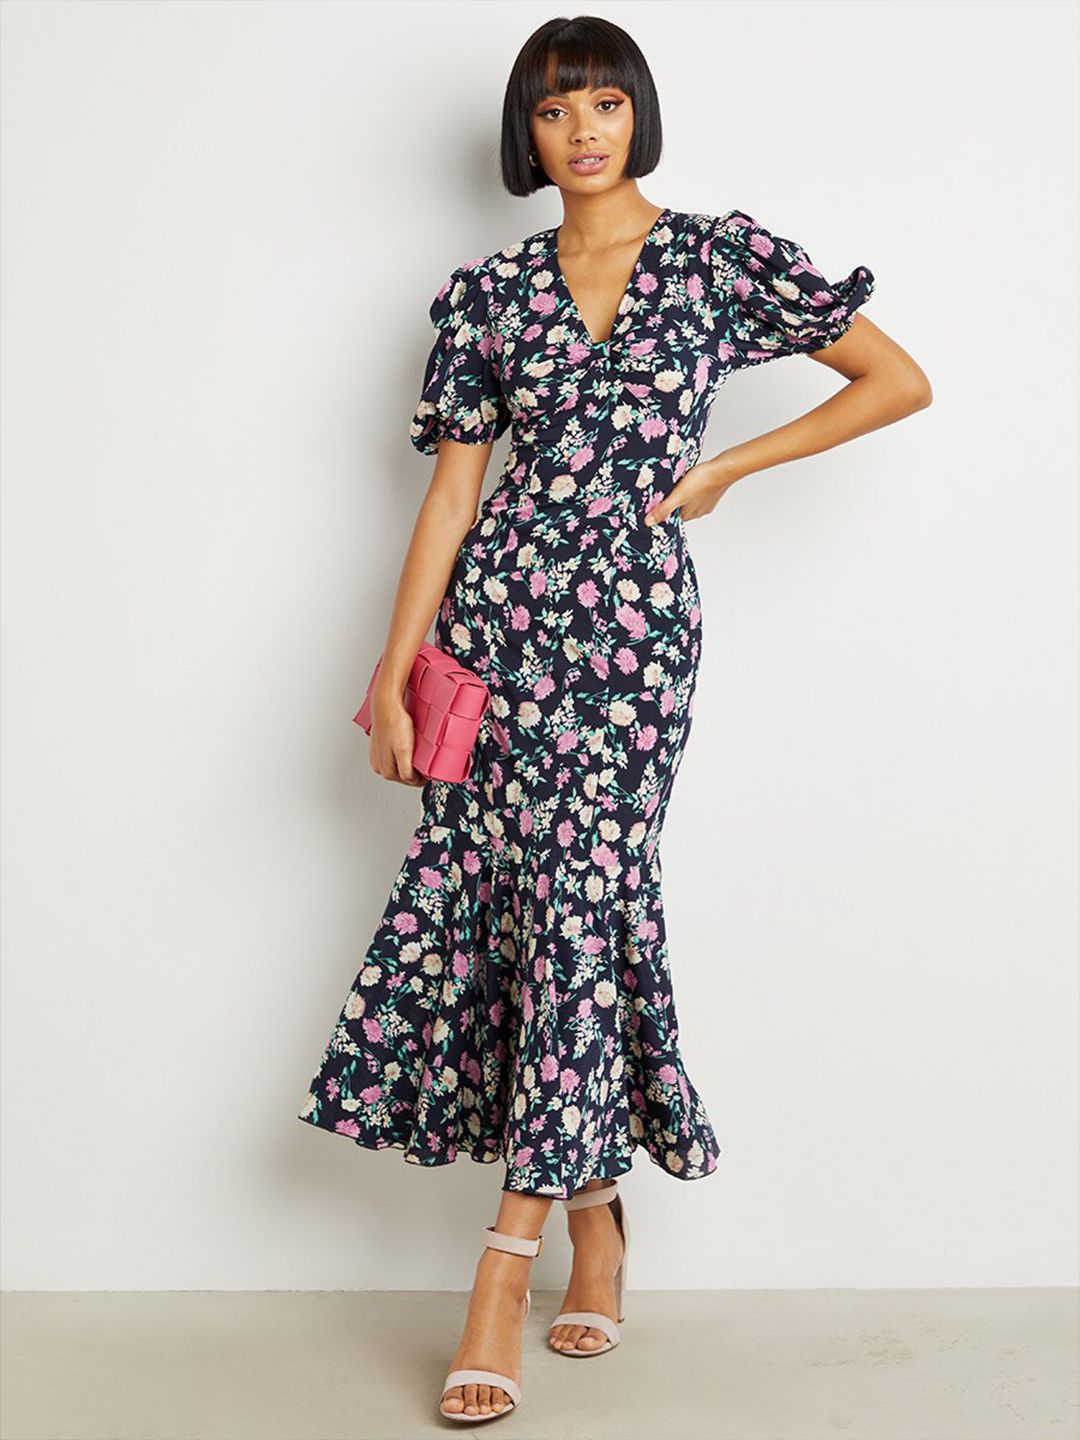 Styli Black Floral Maxi Dress Price in India